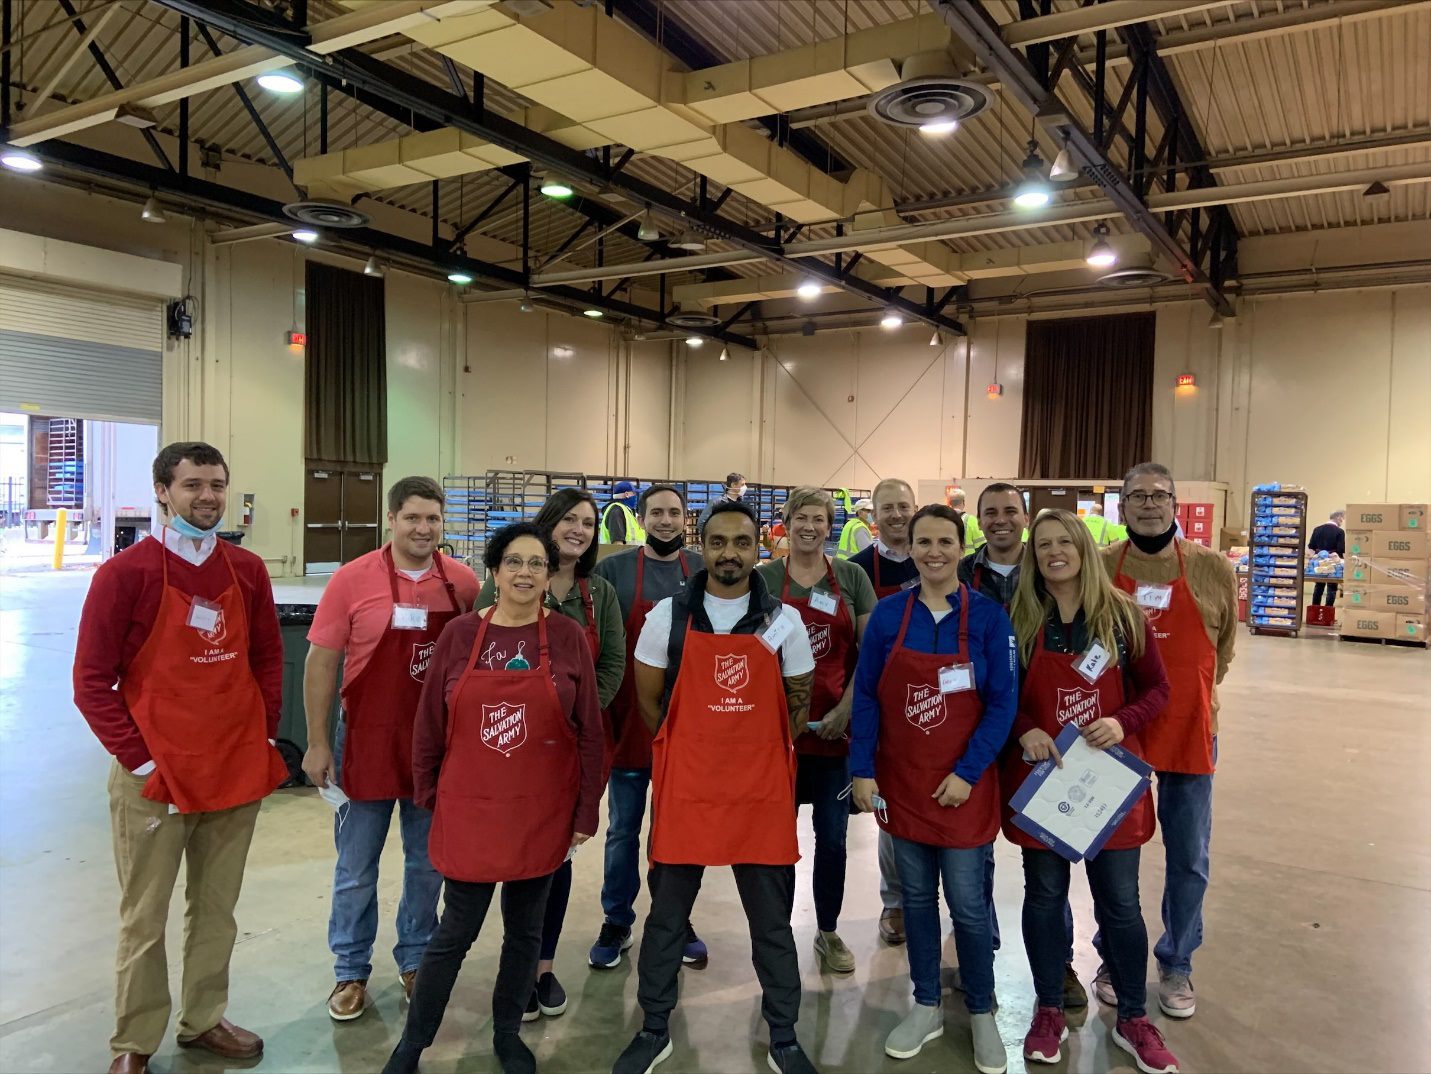 Pictured, a team of Worthington employees volunteering at the Salvation Army’s Christmas Cheer event, where toys and meals were distributed to brighten the holidays for many families.